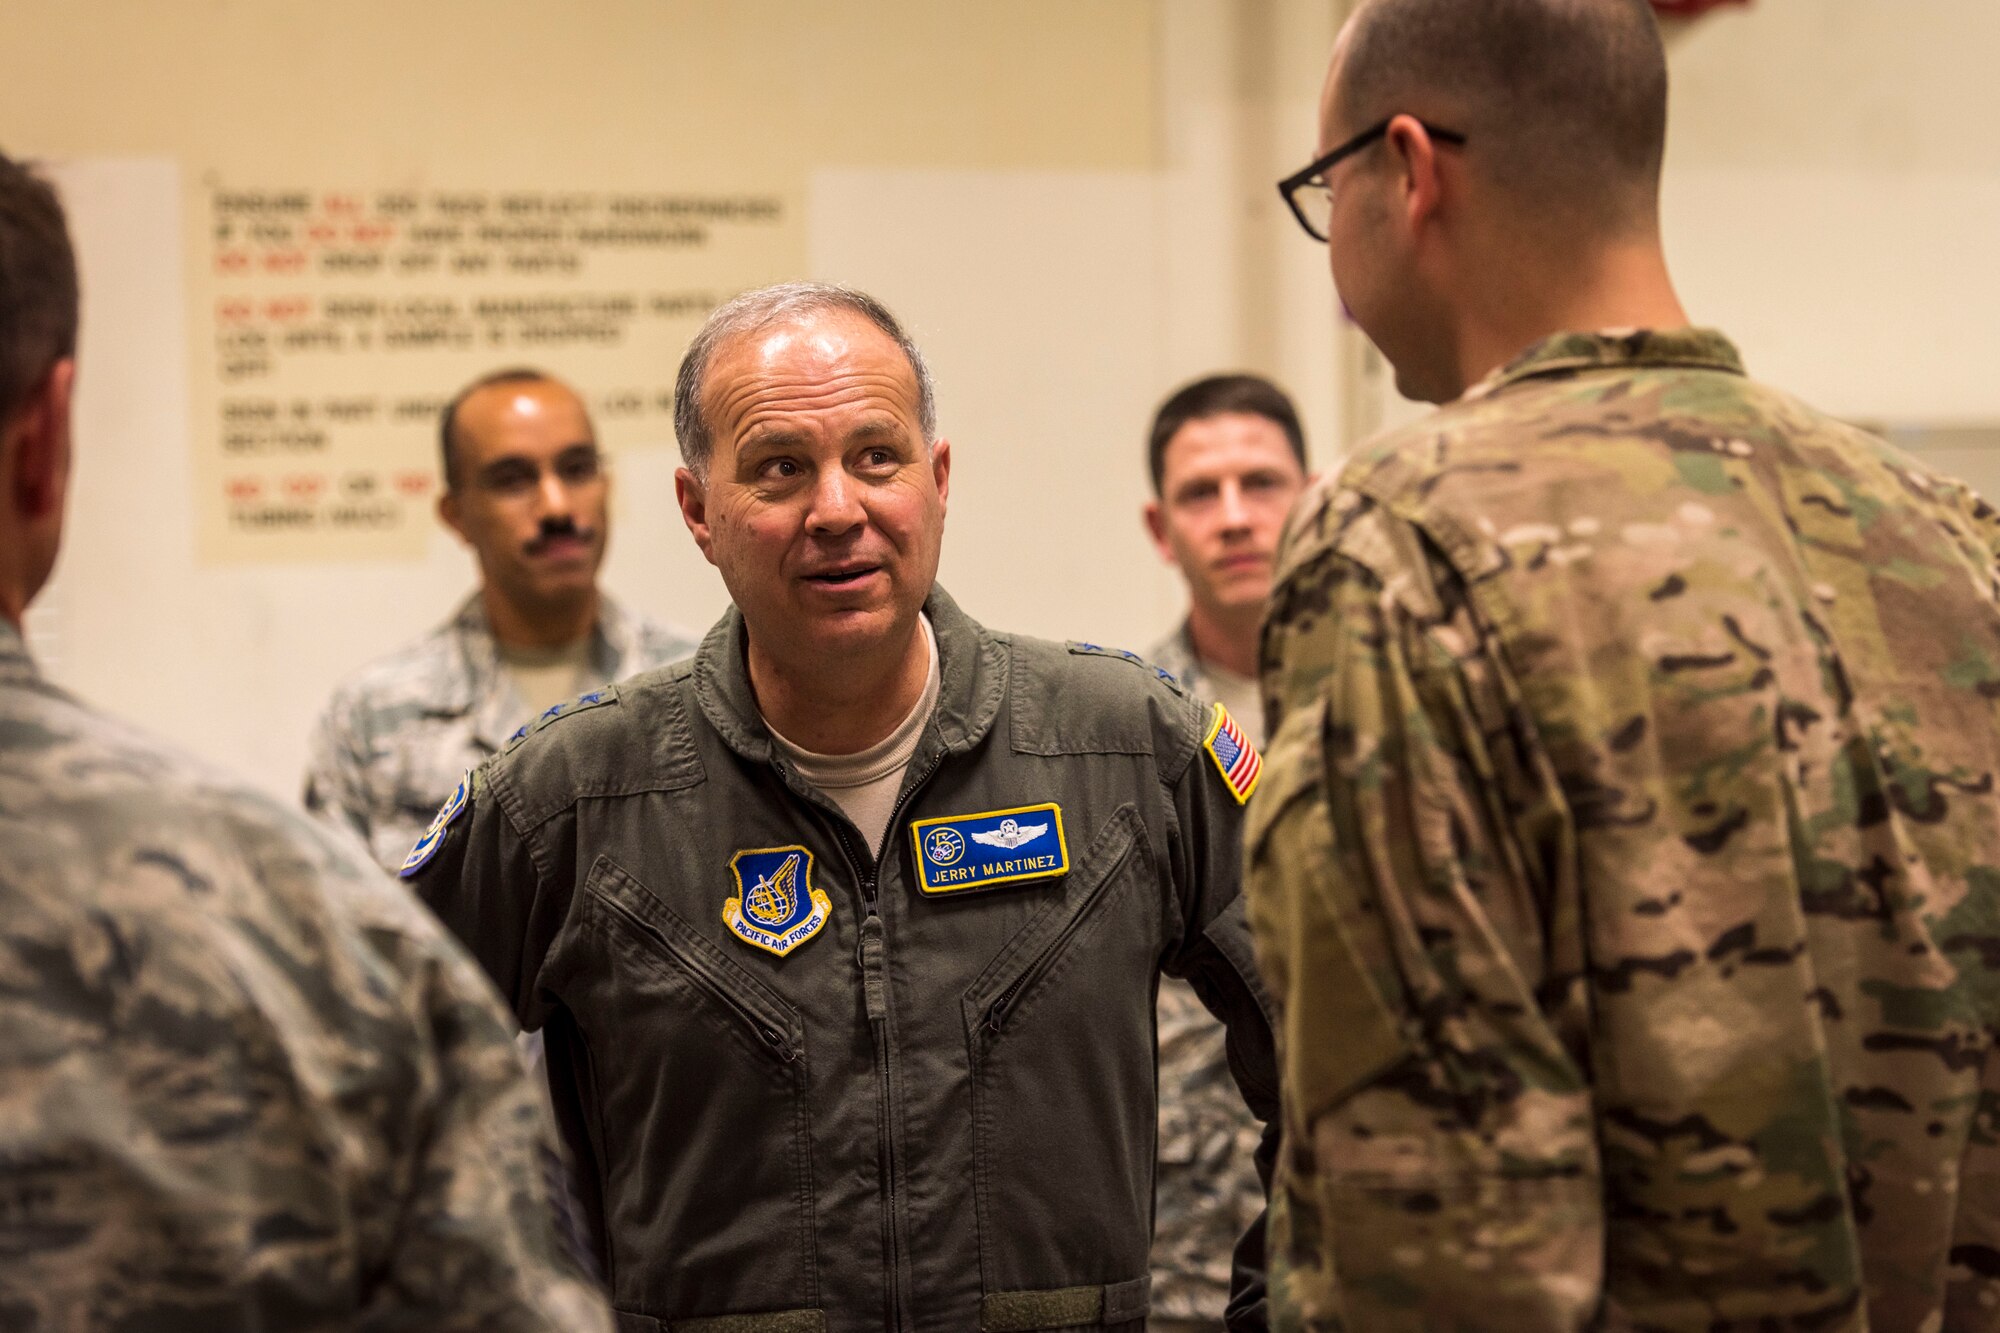 U.S. Air Force Lt. Gen. Jerry P. Martinez, center, the U.S. Forces Japan and Fifth Air Force commander, talks with Tech. Sgt. Jordon Jones, right, a 35th Maintenance Squadron aircraft structural maintenance craftsman, during his visit at Misawa Air Base, Japan, Oct. 11, 2018. The general, joined by his command chief, Chief Master Sgt. Terrence Greene, engaged with Airmen across the installation, sharing their perspective on how the 35th Fighter Wing supports the broader strategic objectives in the defense of Japan. (U.S. Air Force photo by Tech. Sgt. Benjamin W. Stratton)